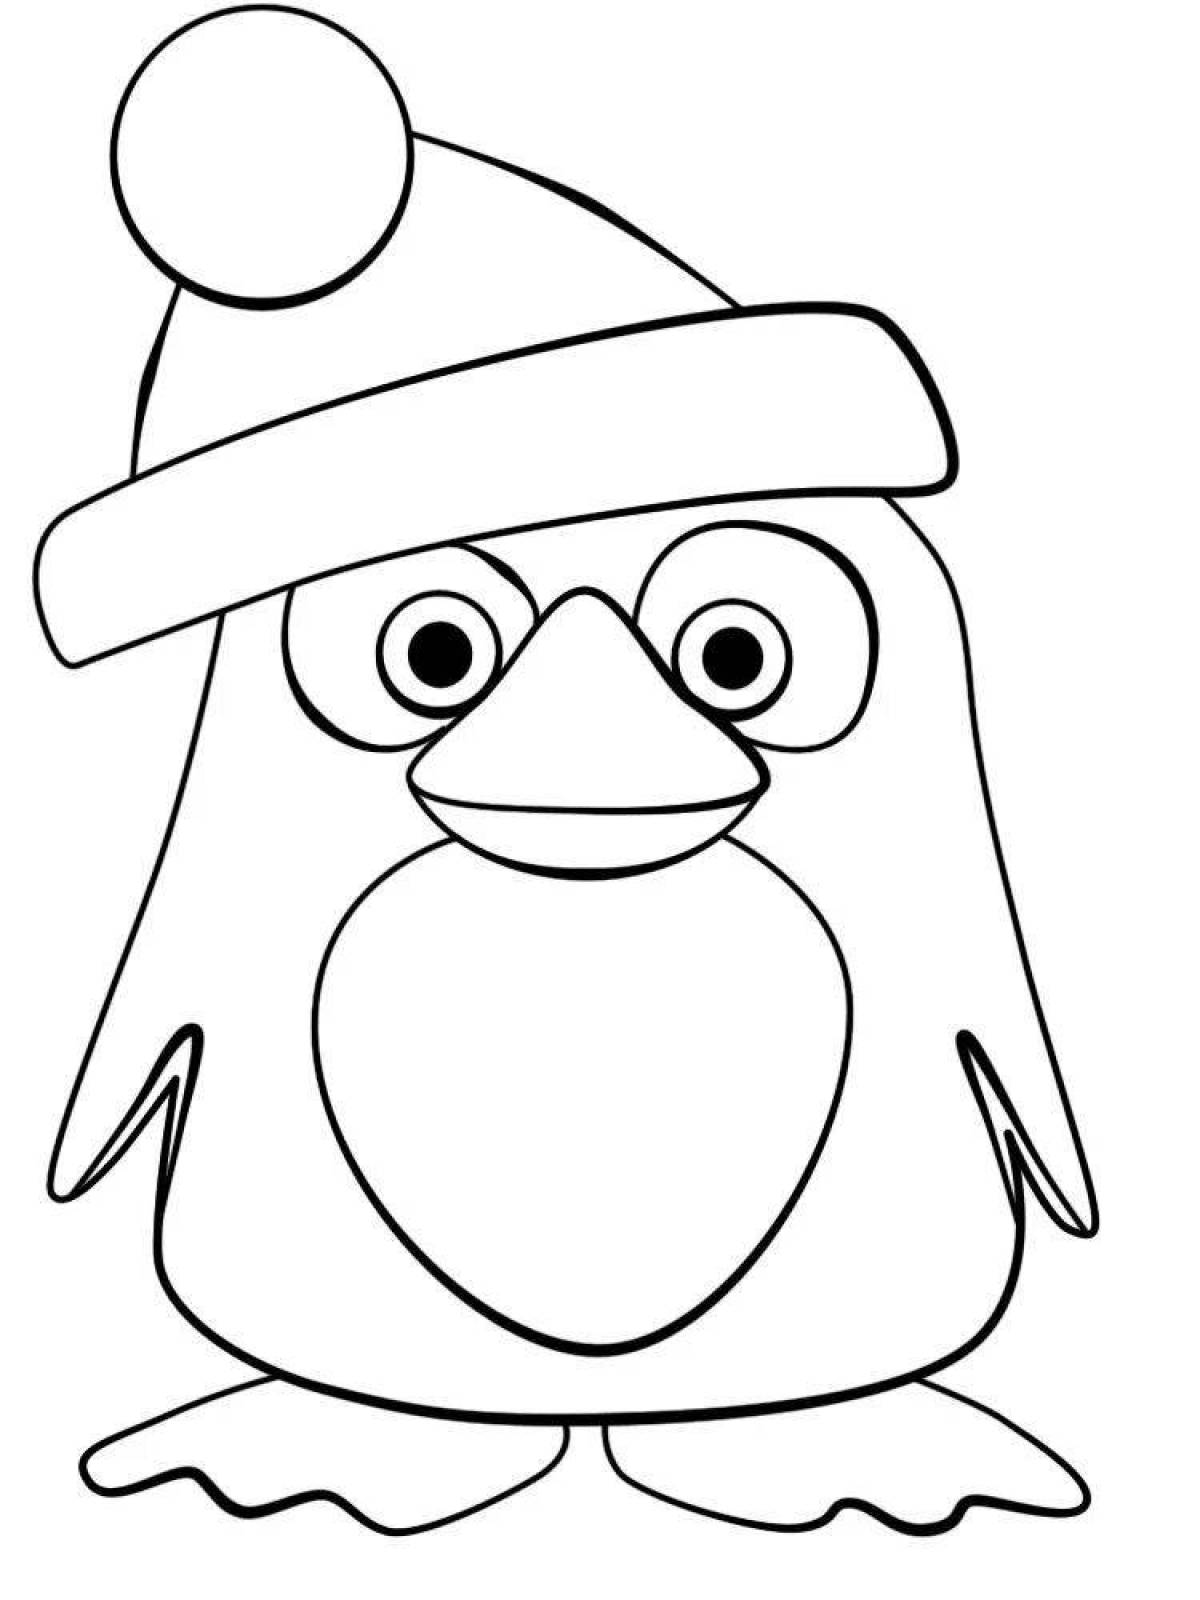 Playful penguin coloring page for kids